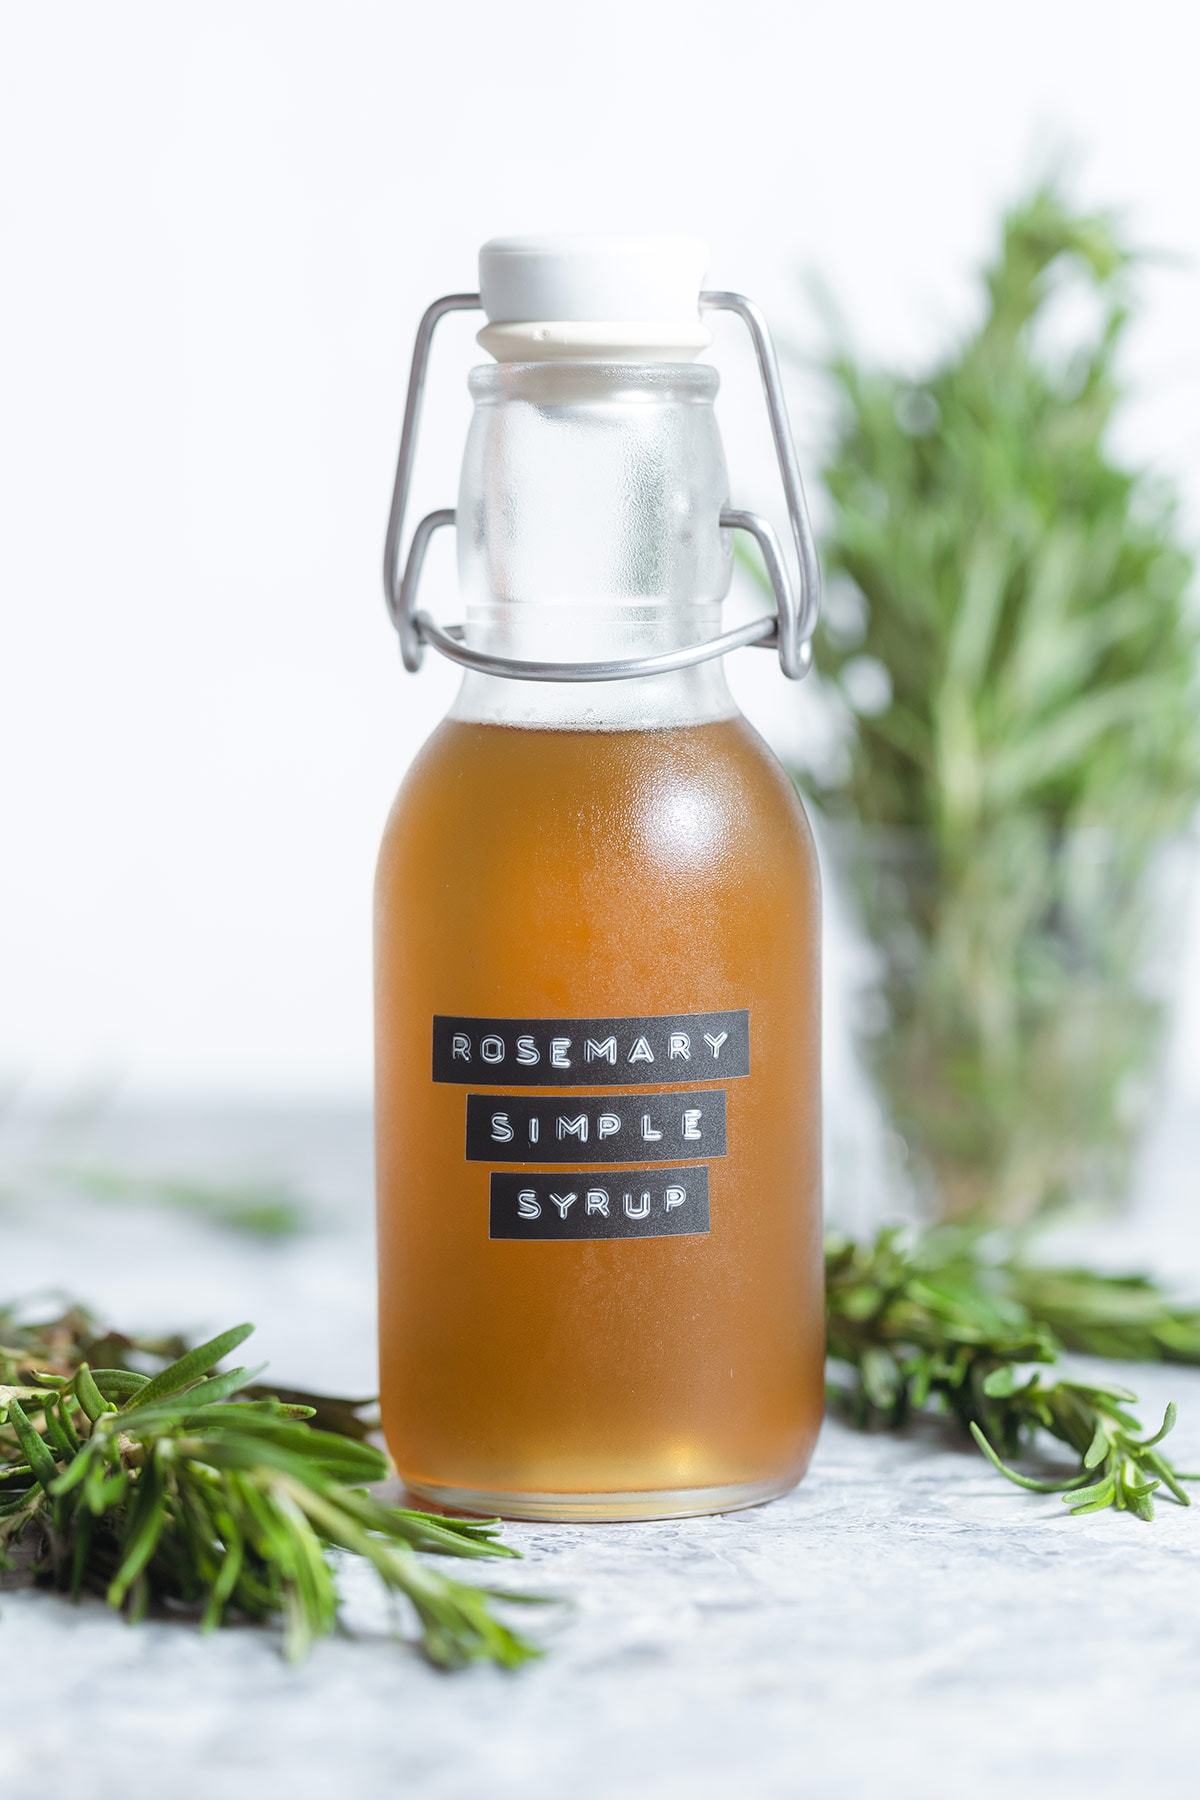 Rosemary simple syrup in a glass jar with more fresh rosemary in the background on a light grey background.